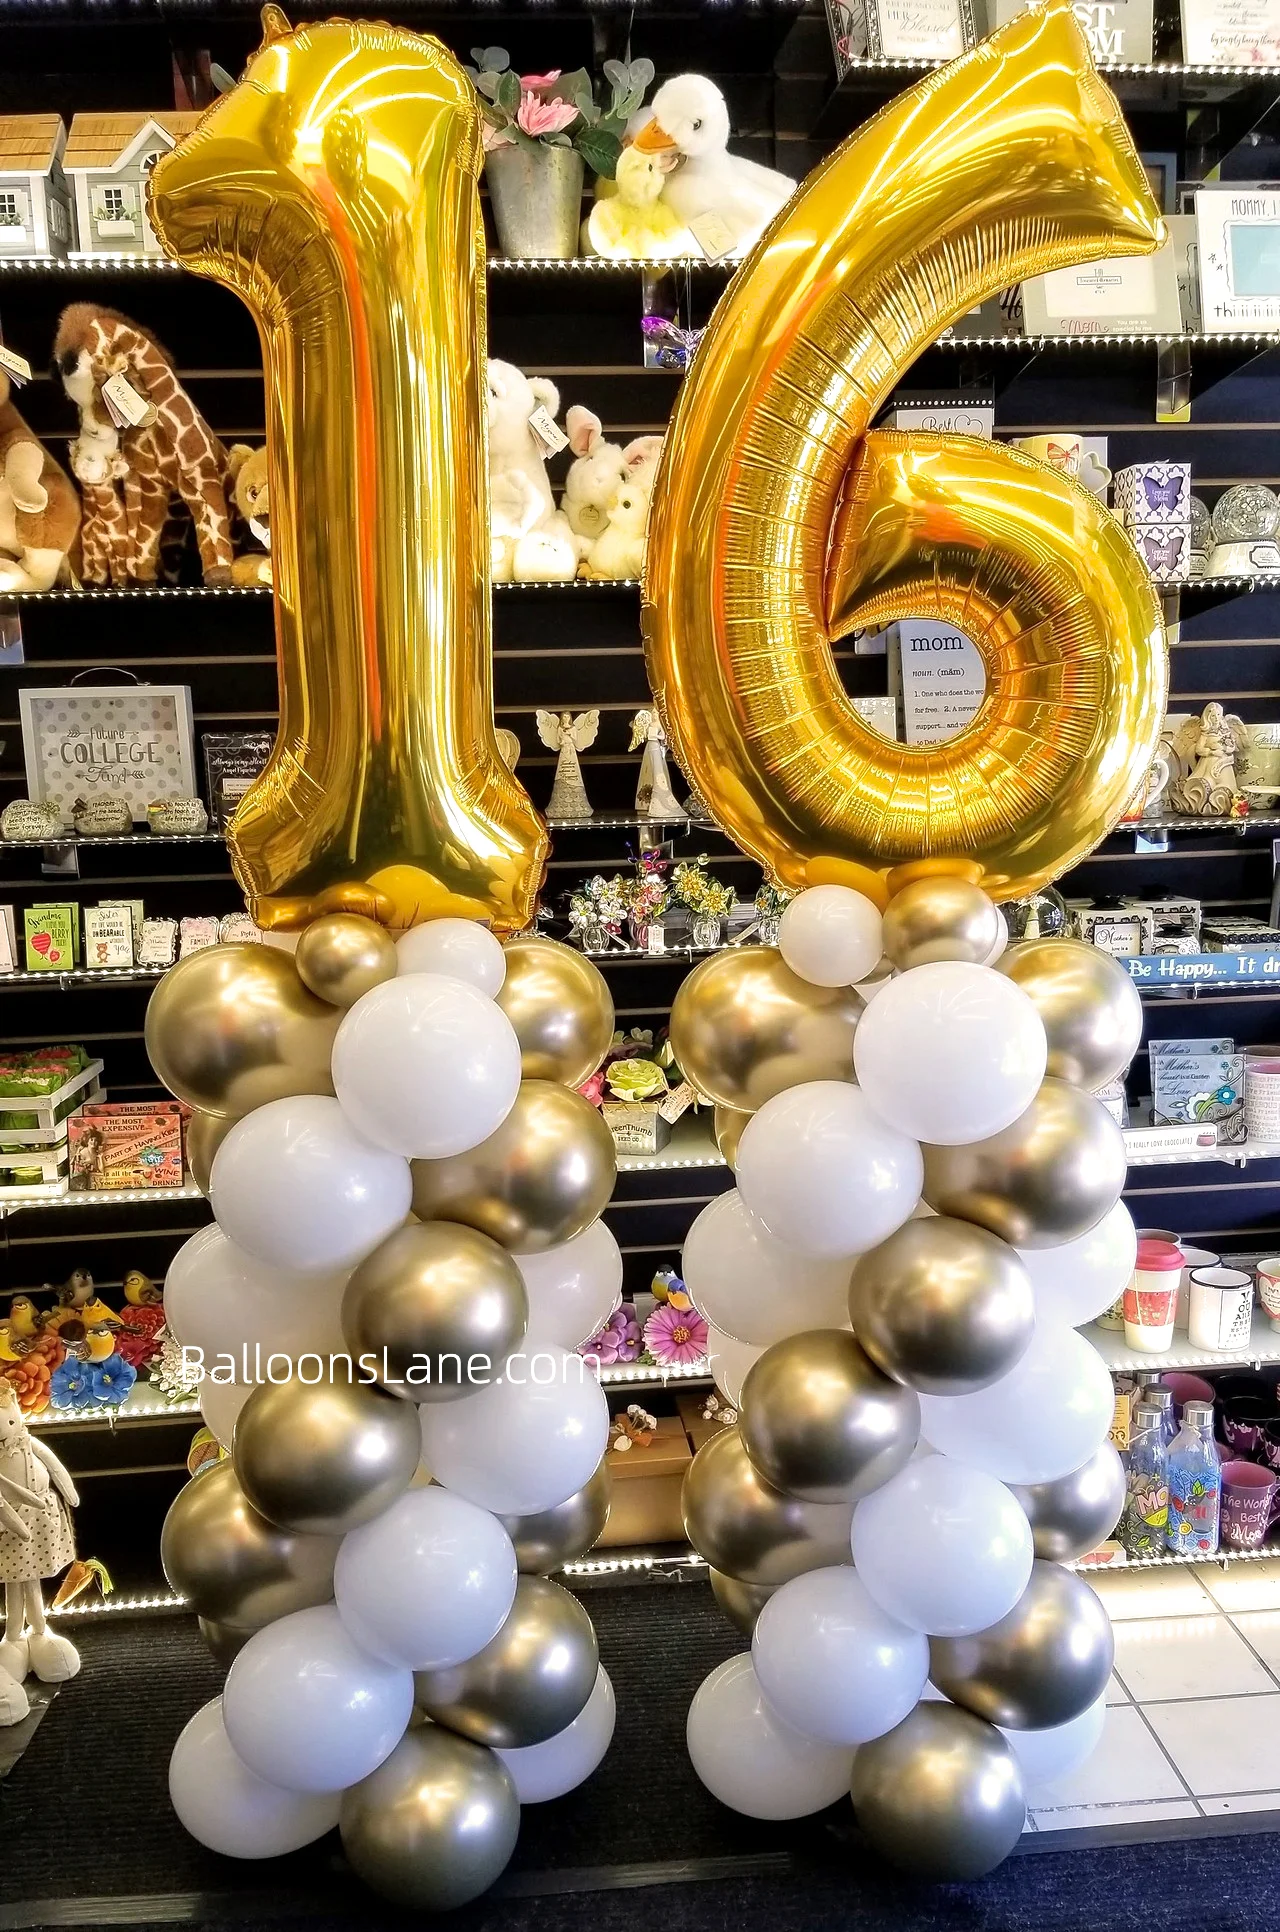 Large Number Balloons 1 & 6 Column with White and Gold Balloons to Celebrate Birthday and Anniversary in NYC